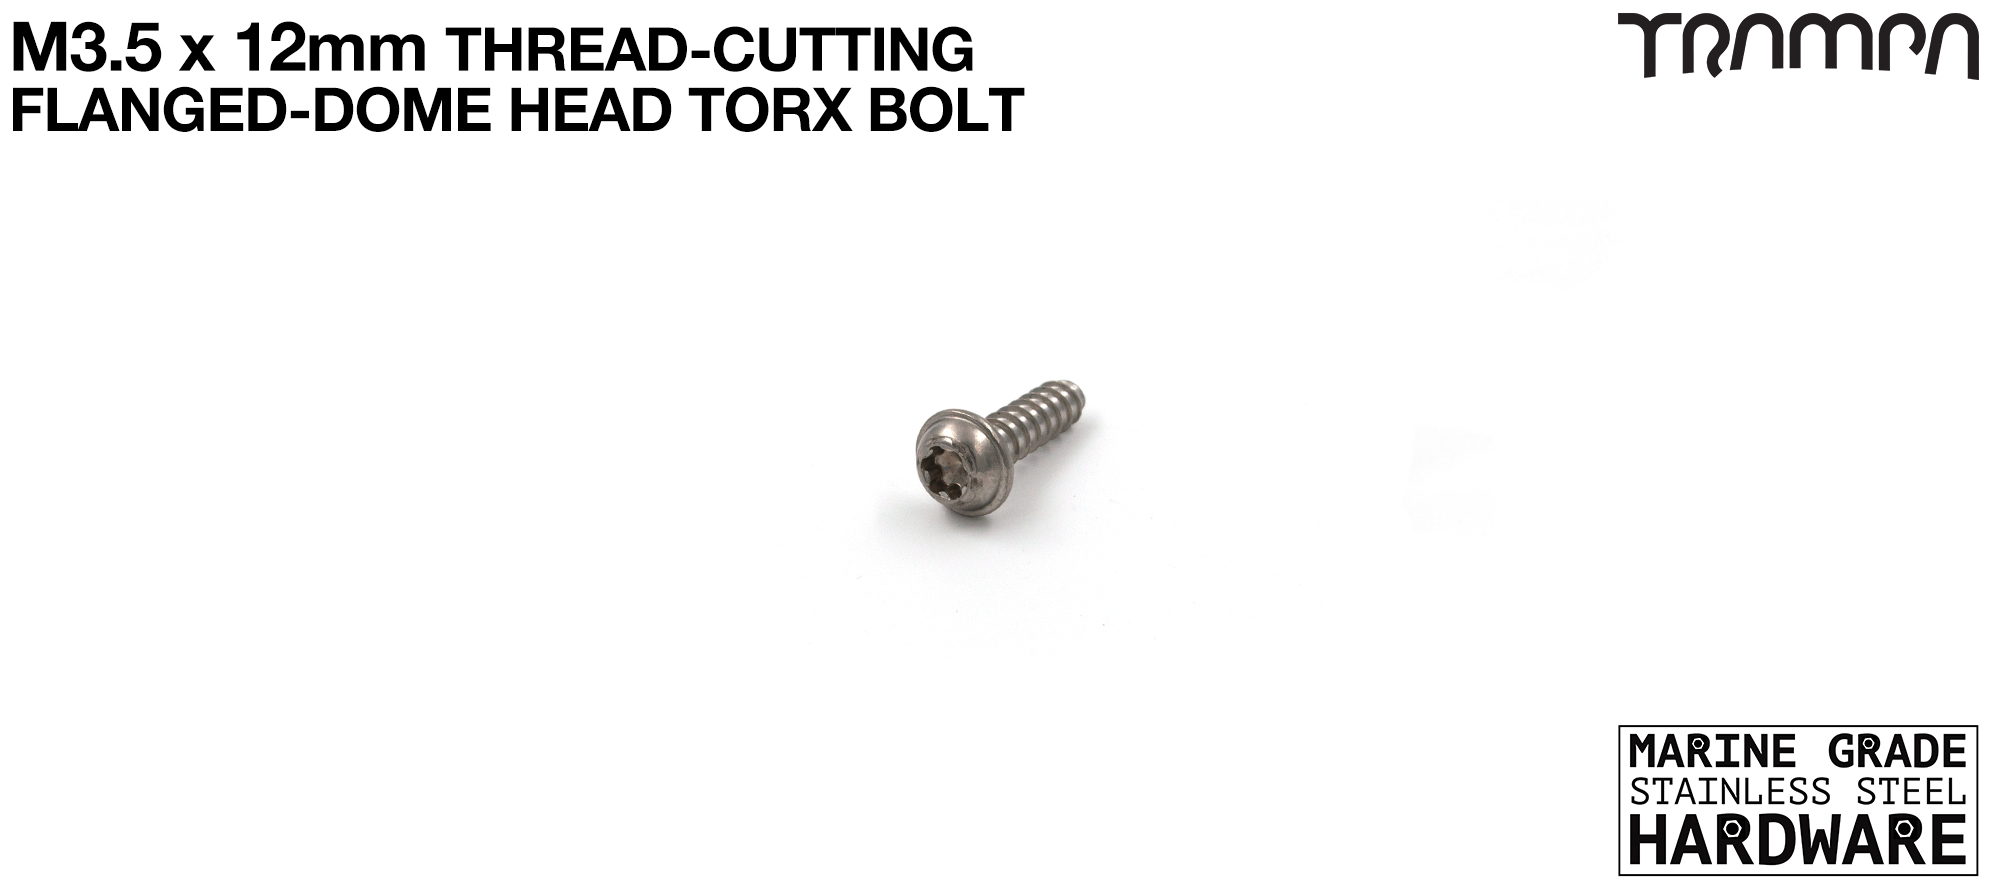 M3.5 x 12 PAN Headed TORX Bolt. - Used to secure the WINGS to the TRAMPA Deck